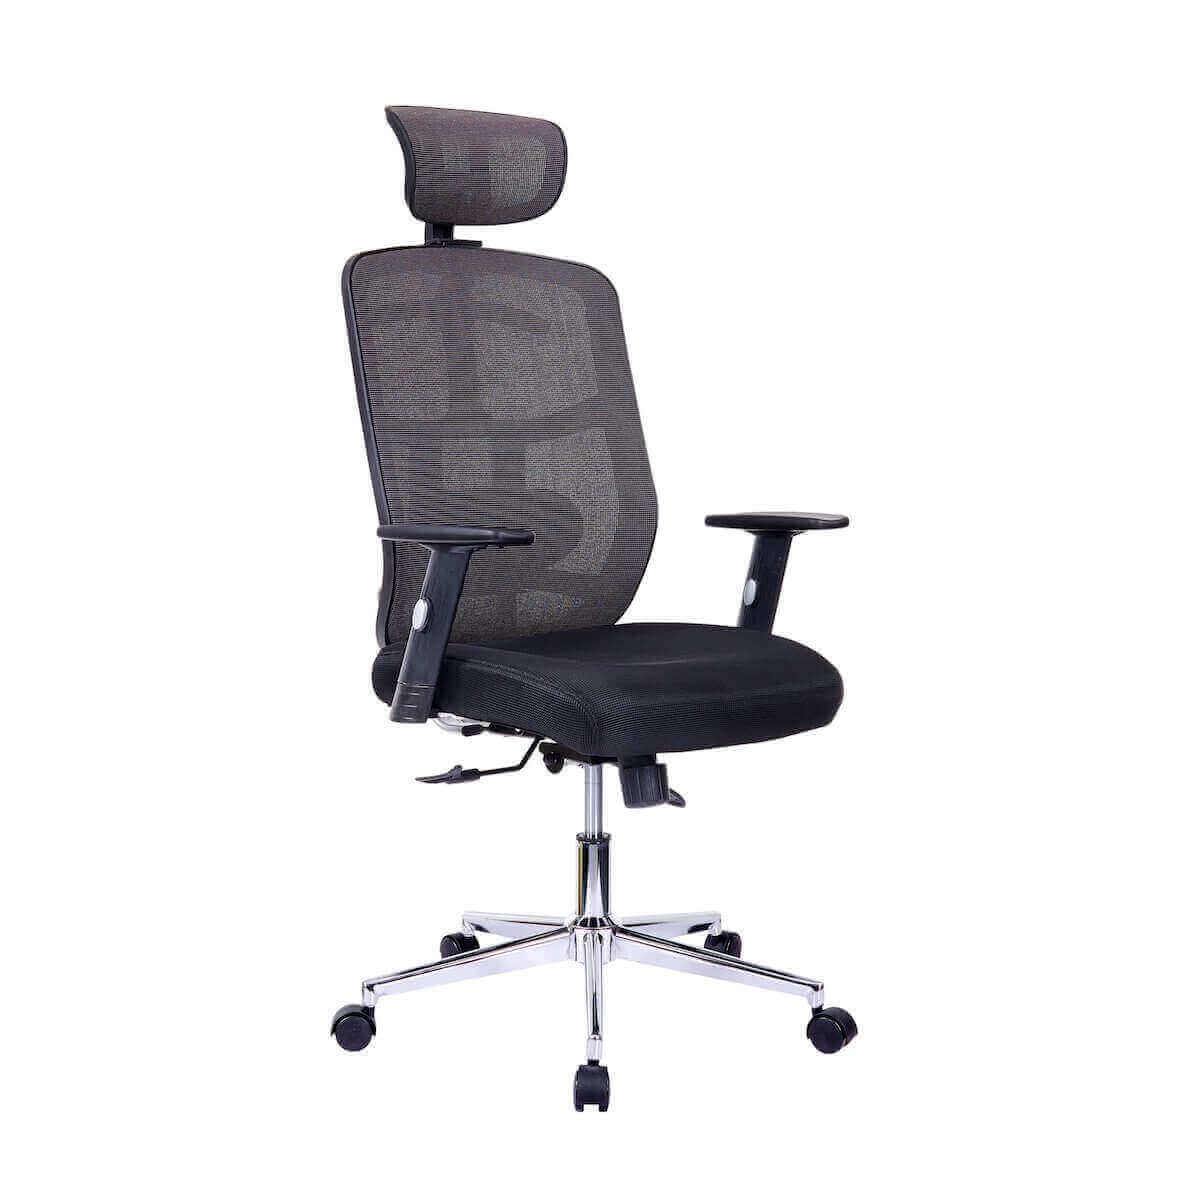 Techni Mobili Black High Back Executive Mesh Office Chair with Arms, Lumbar Support, and Chrome Base RTA-1010-BK Angle